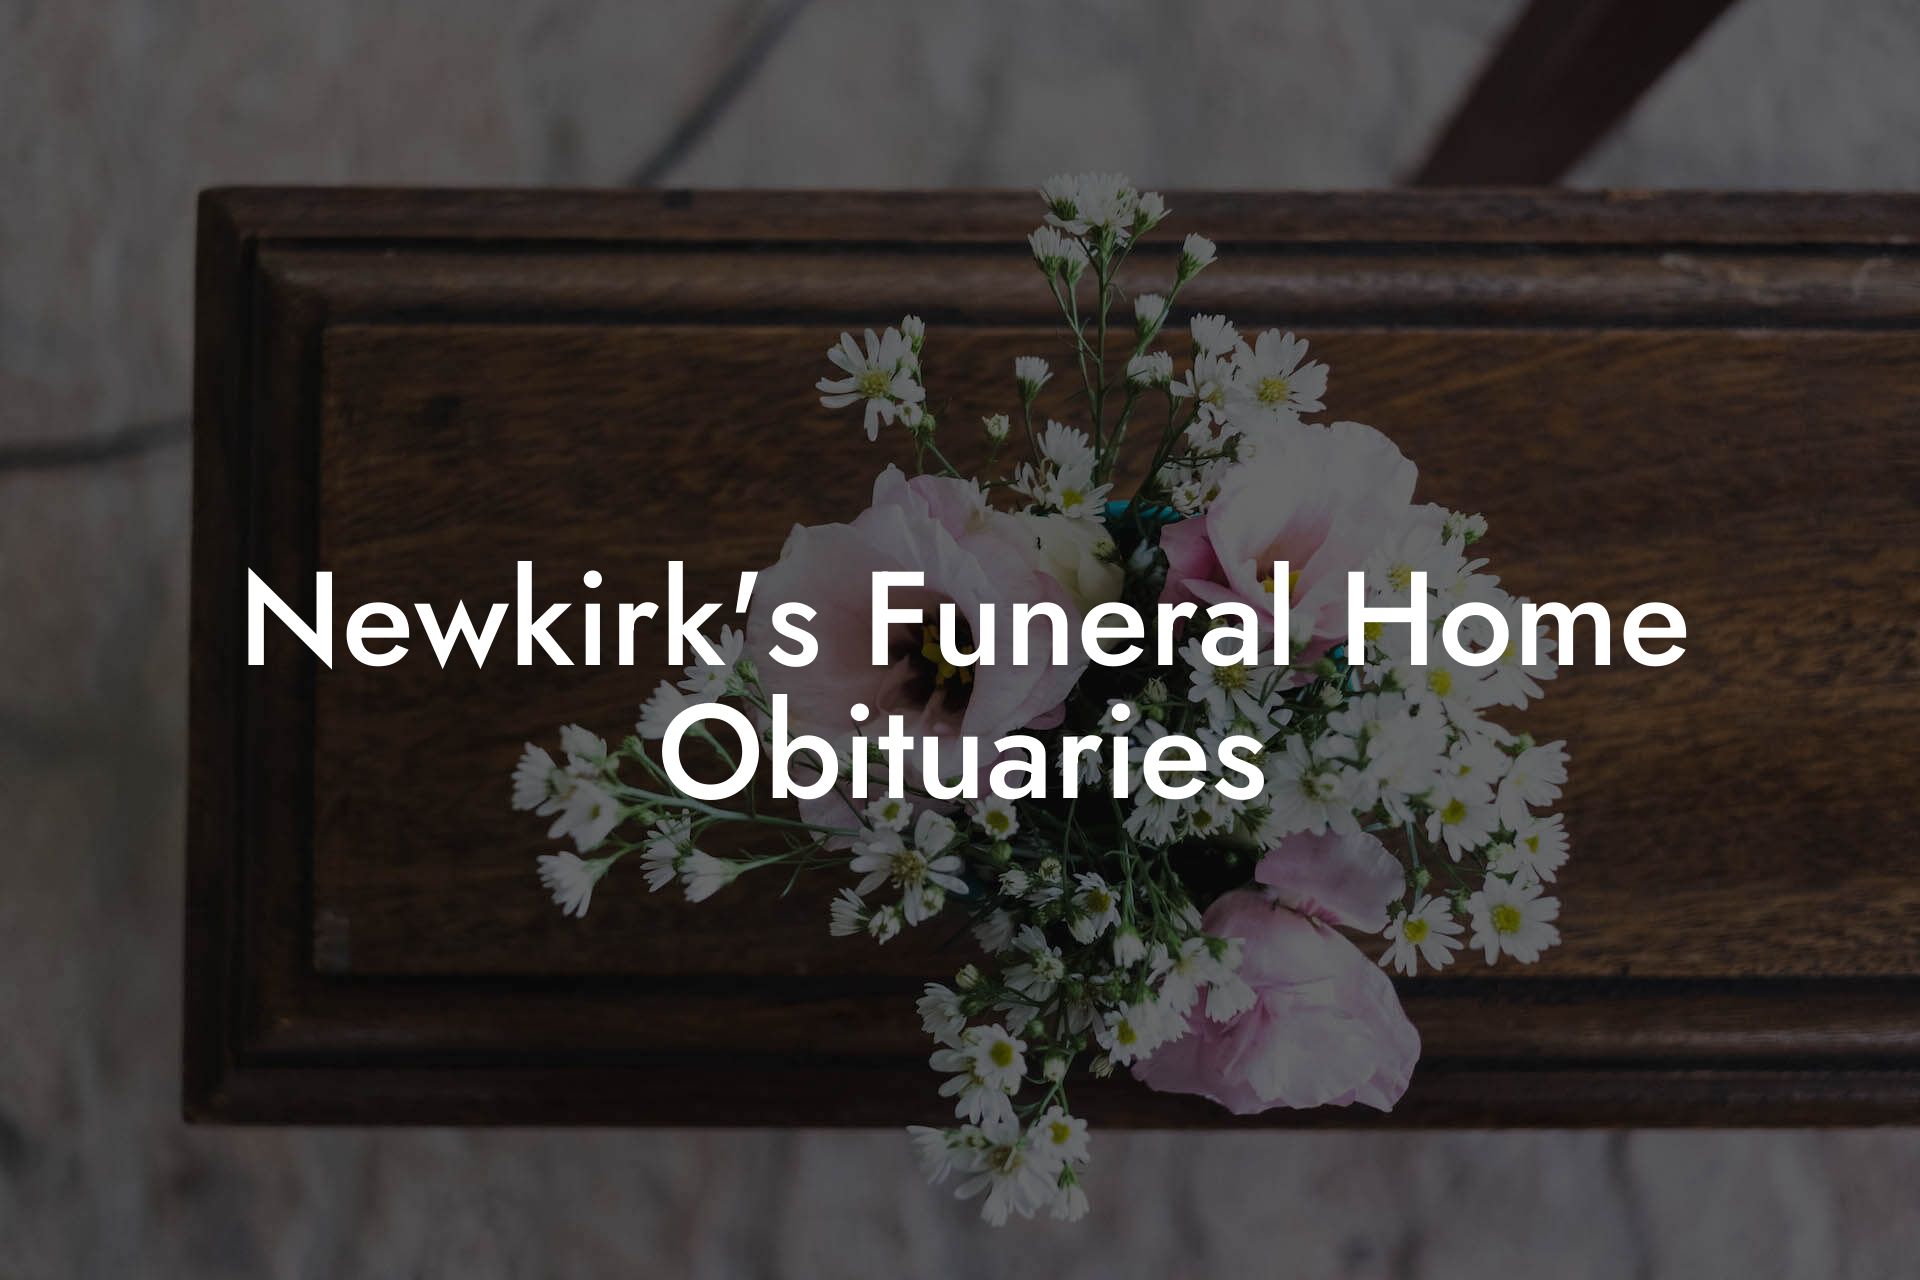 Newkirk's Funeral Home Obituaries